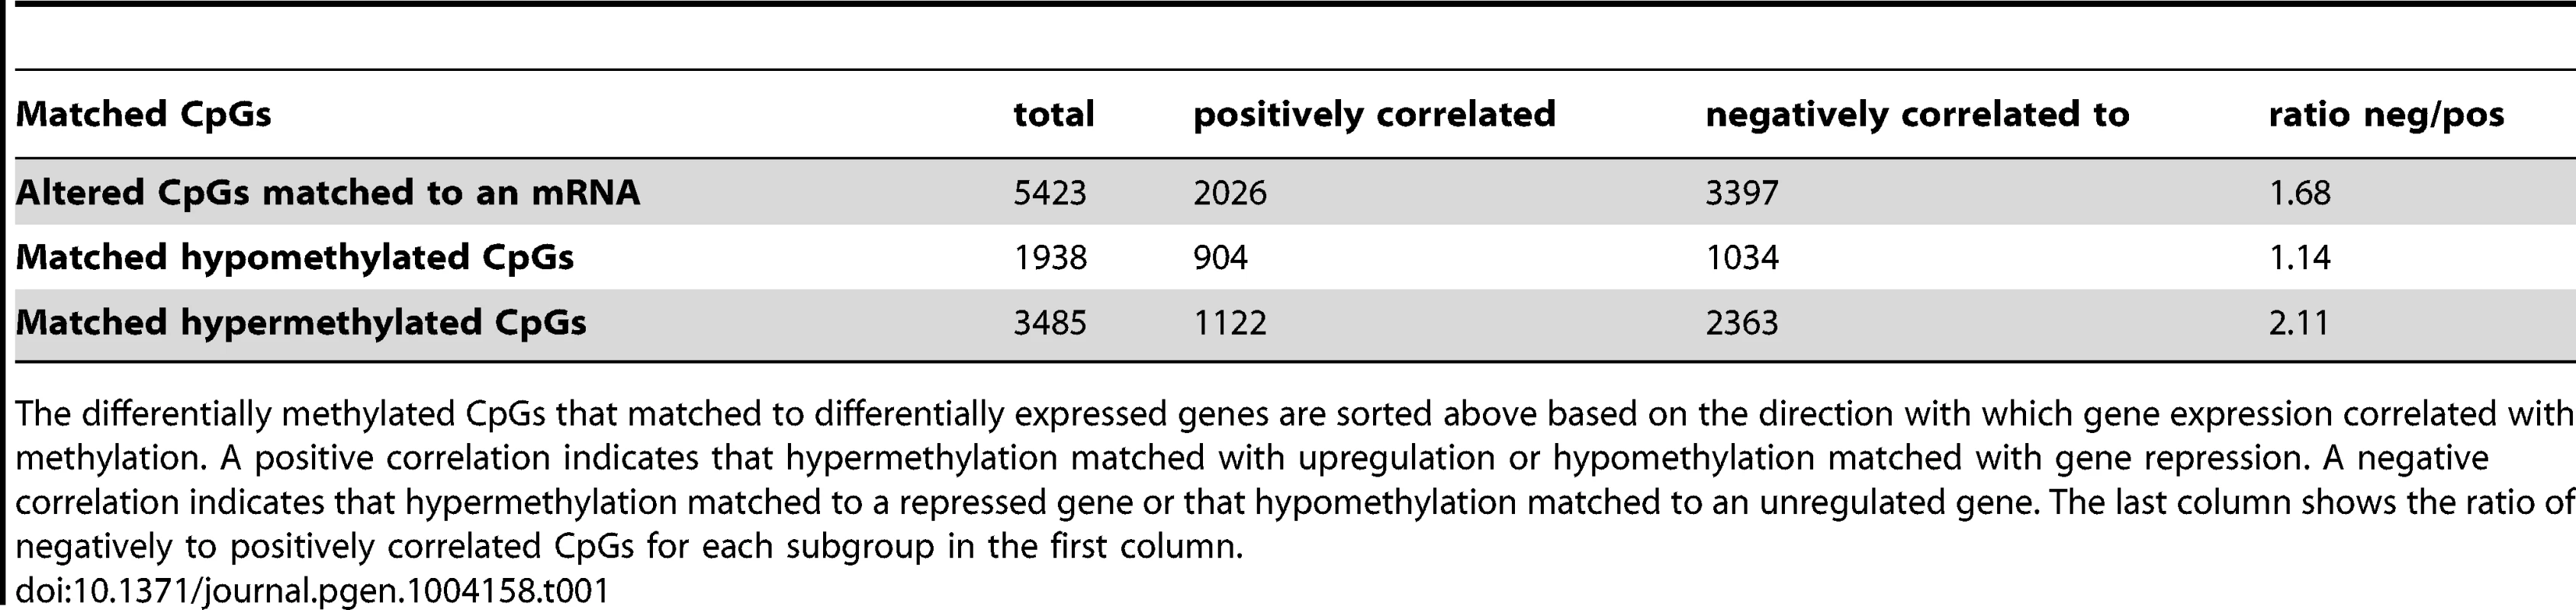 Correlation of methylation with gene expression for matched CpGs.